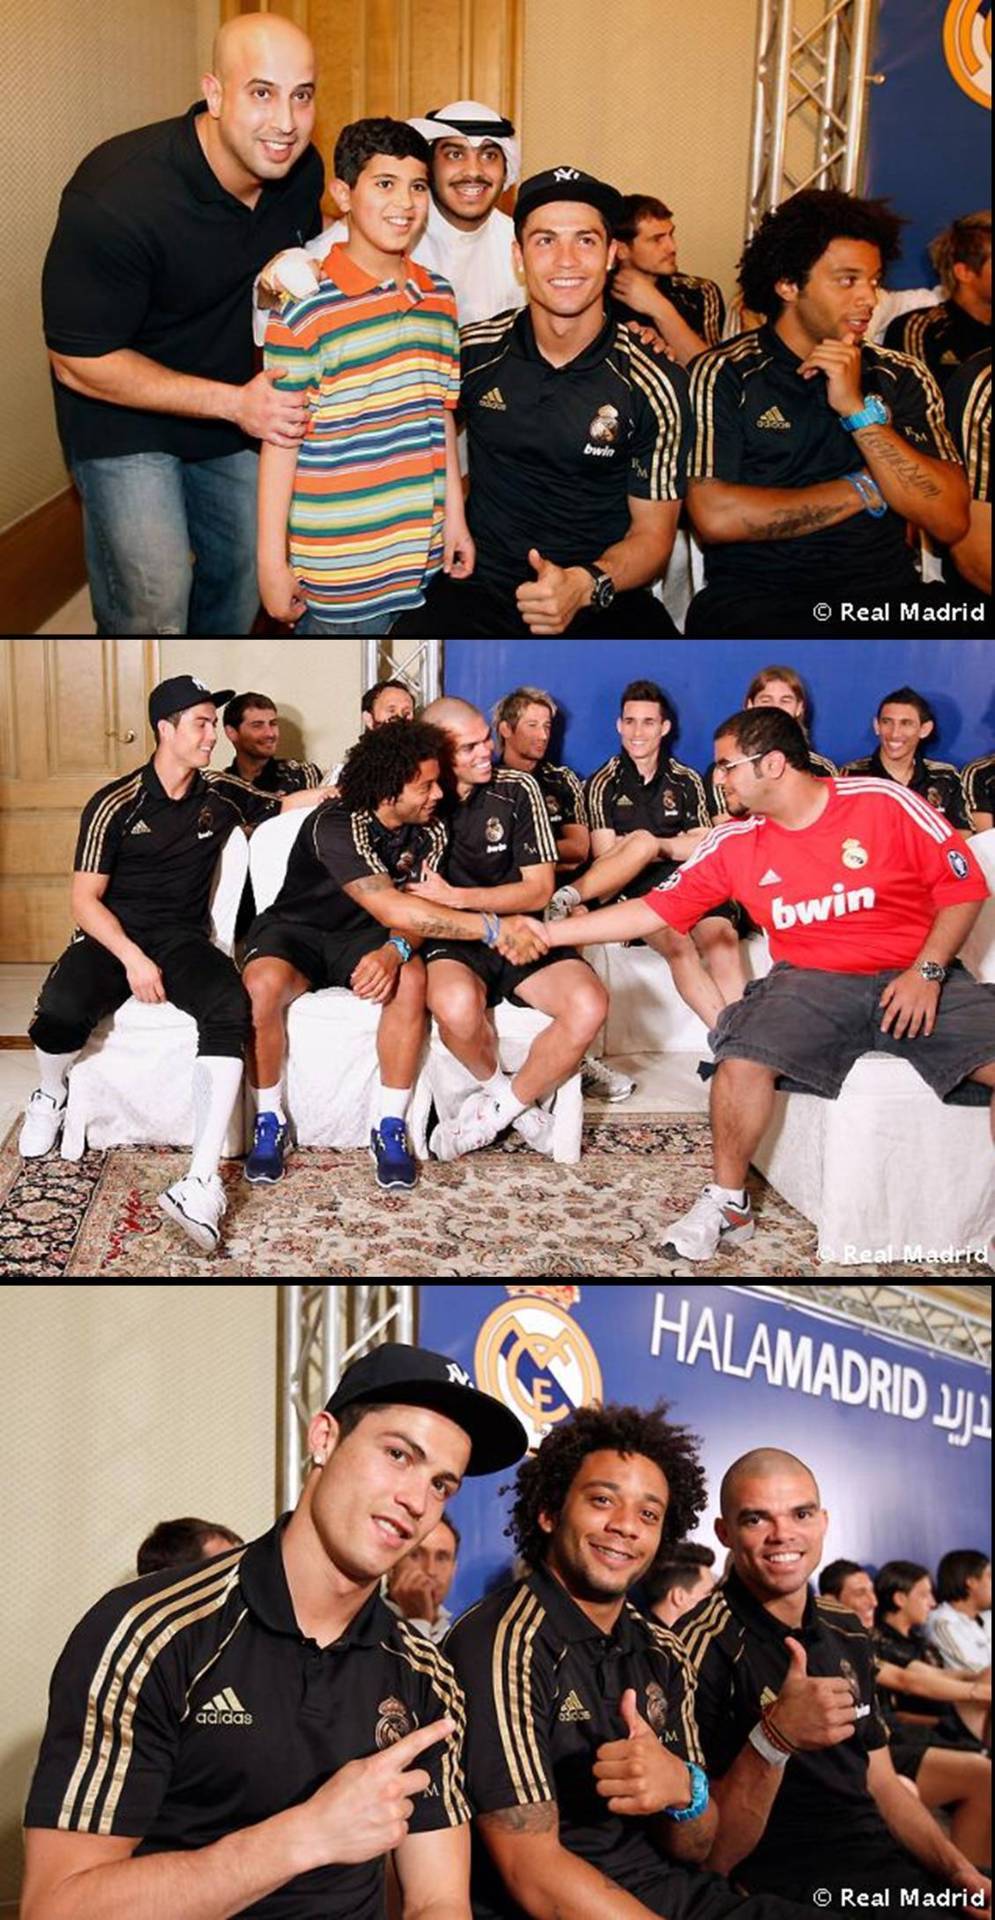 Photo session with fans in Kuwait, 15.05.2012Cool gang Cristiano, Marcelo &amp; Pepe. But Cristiano&#8217;s white socks! Fashionable? Hm.